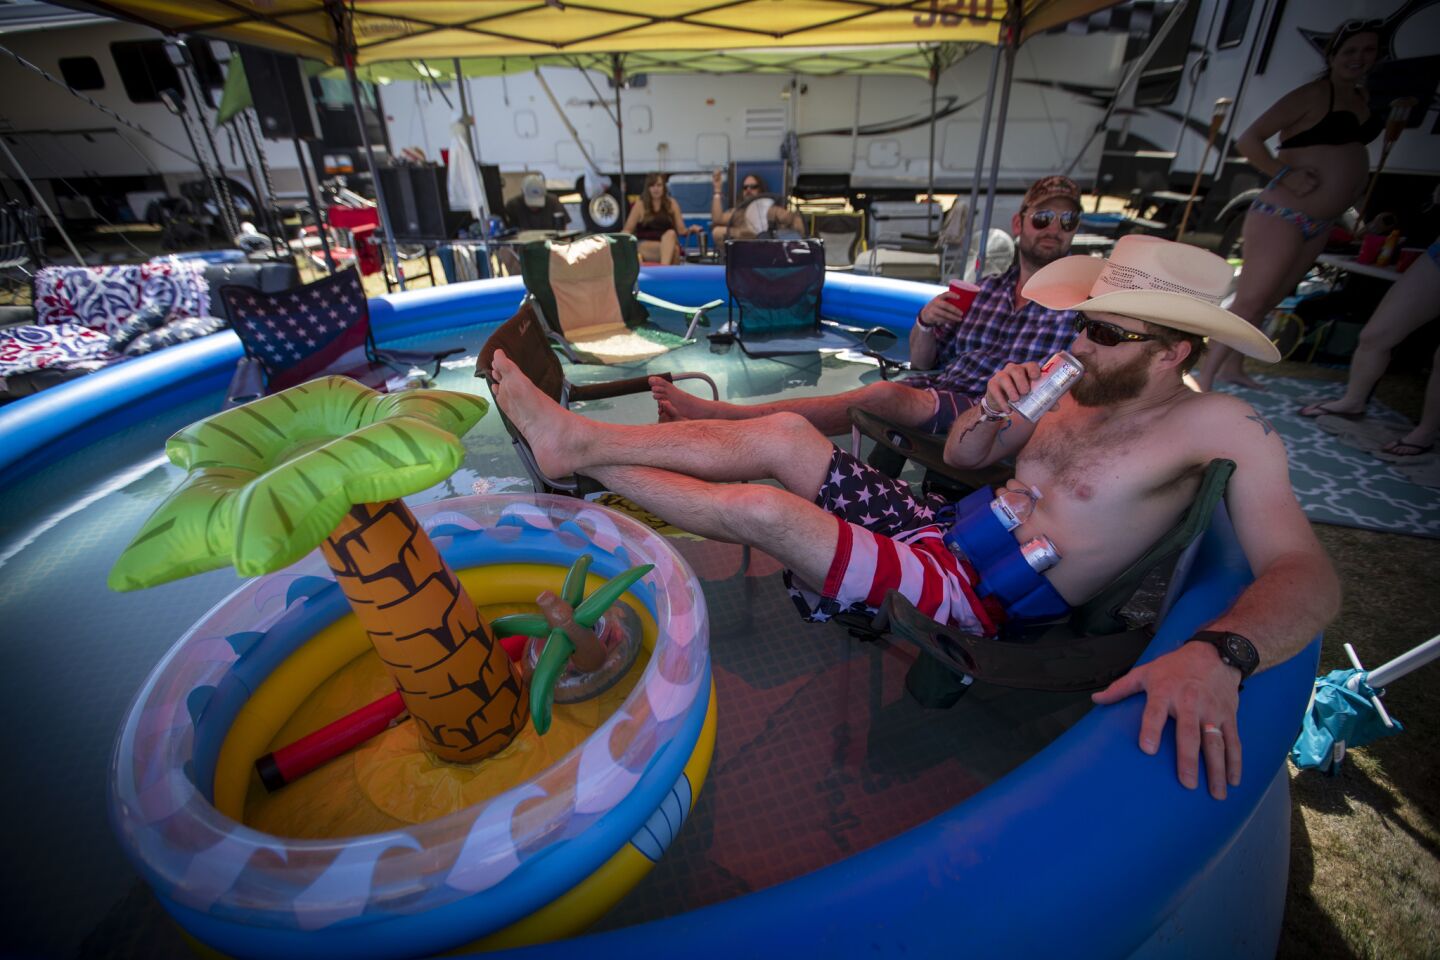 James, of Dallas, (no last name given) front, and John Rust of Portland, Ore., cool off in an inflatable swimming pool while listening to country music in the RV Resort area.